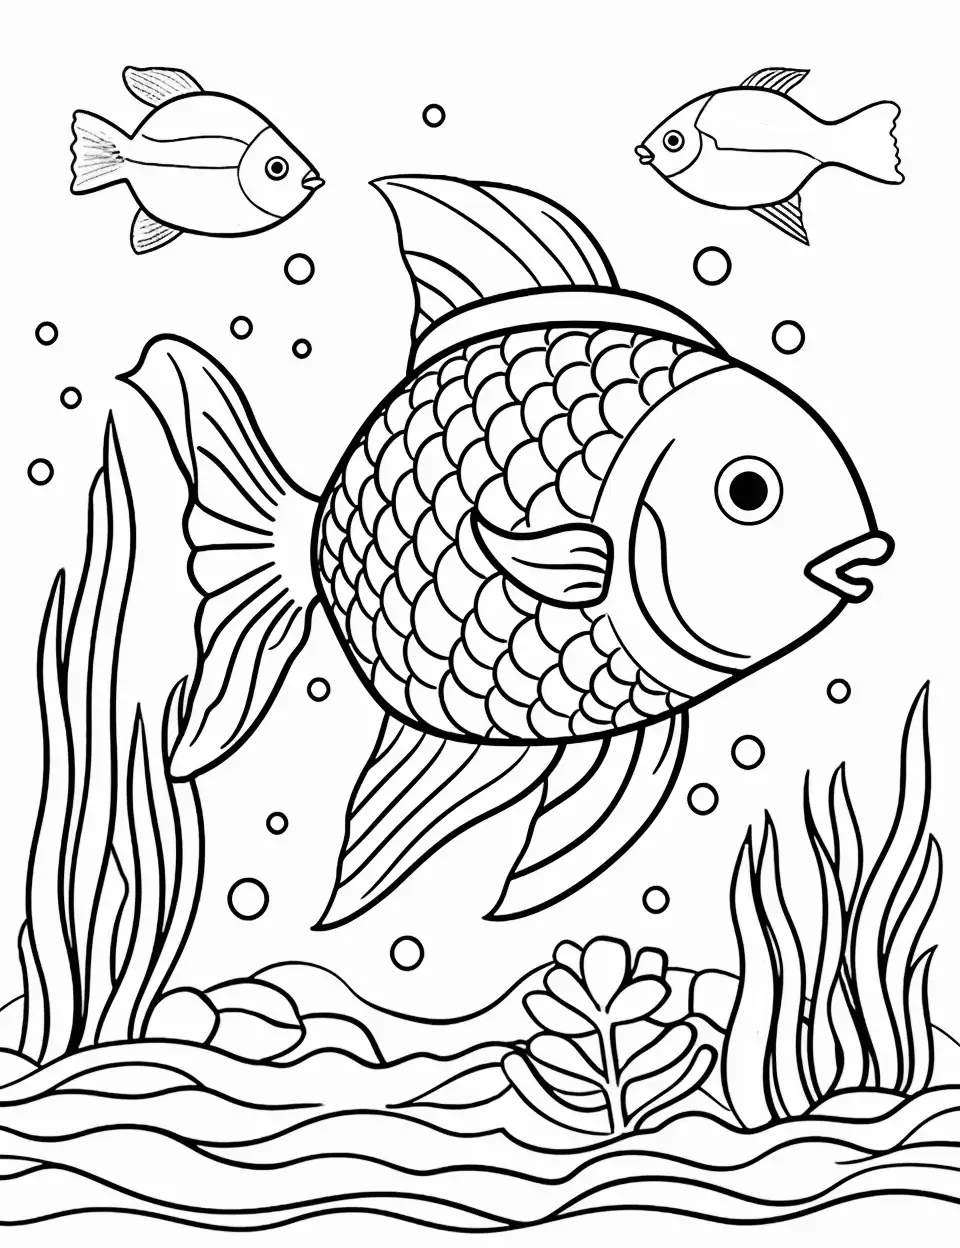 Oasis Fish Coloring Page - Fish enjoying a cool oasis in a river.